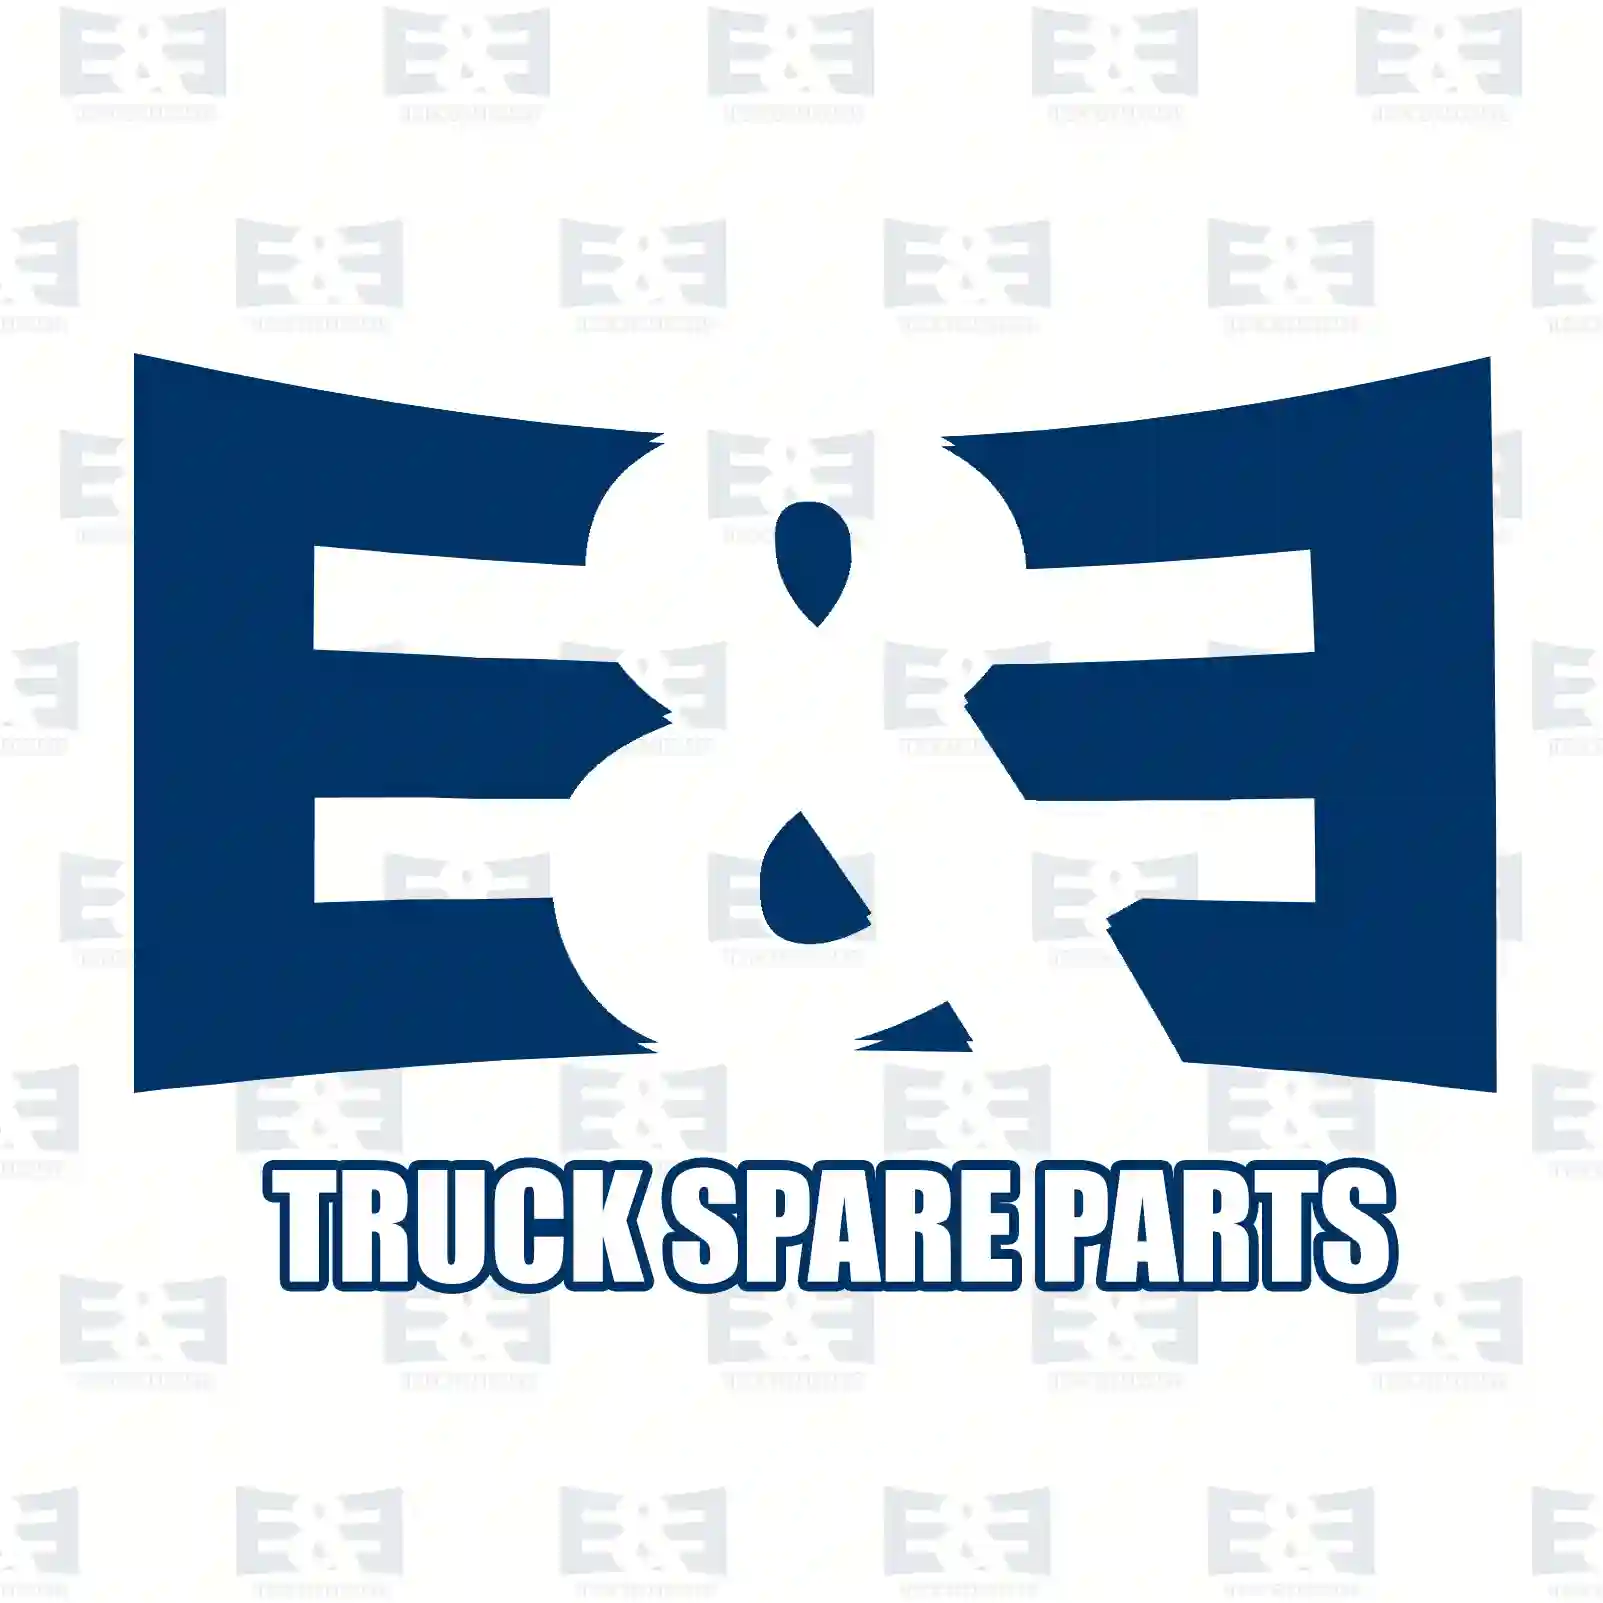 Exhaust System Tensioning band, EE No 2E2204389 ,  oem no:6778983 E&E Truck Spare Parts | Truck Spare Parts, Auotomotive Spare Parts